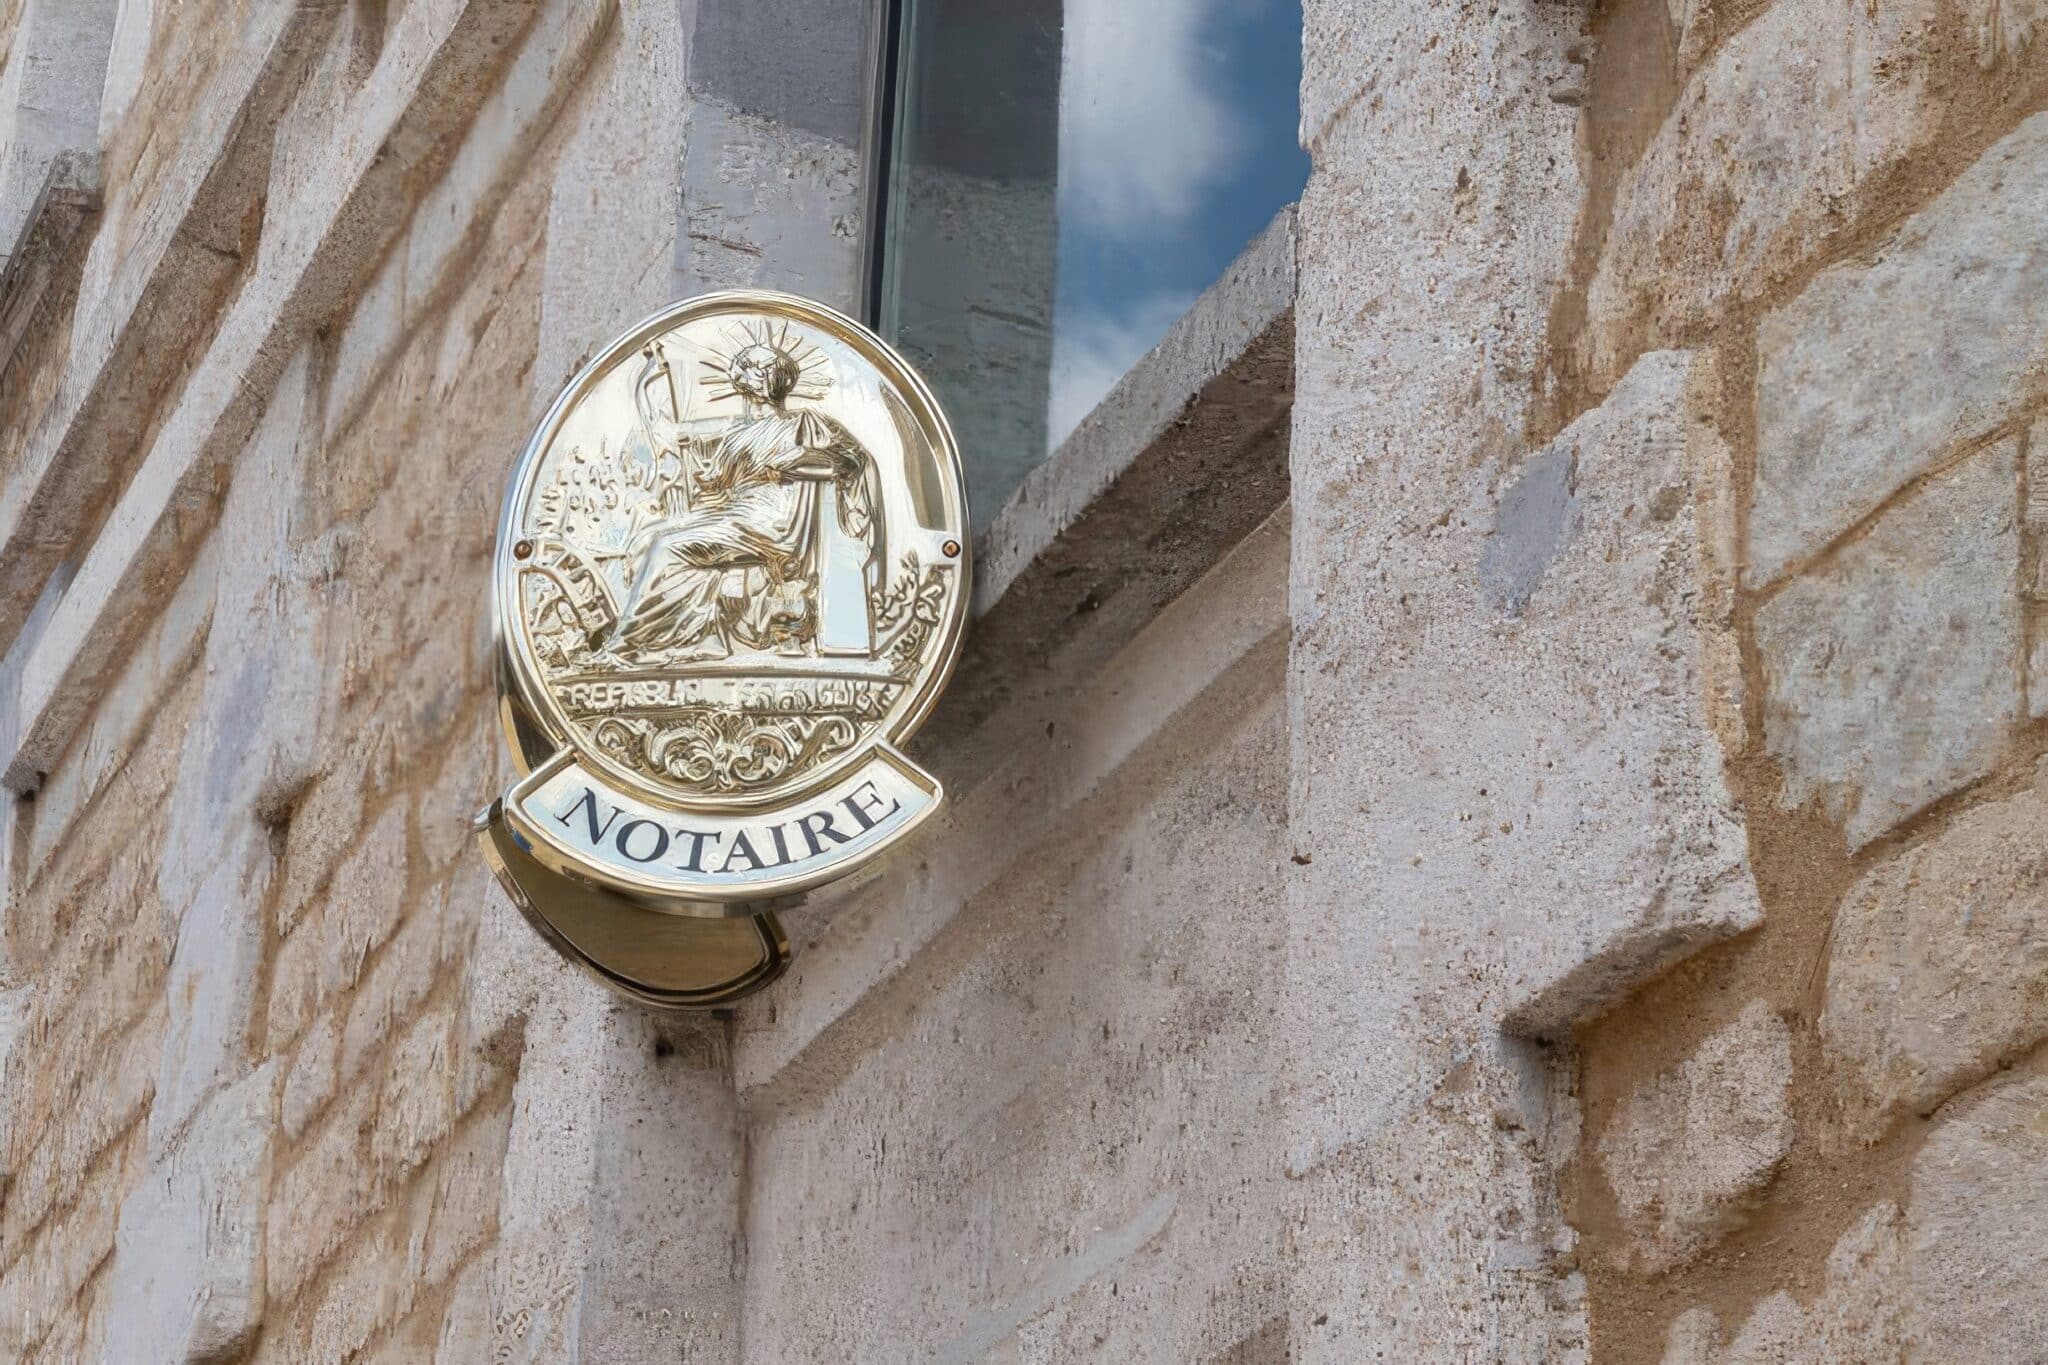 French notaire sign on wall above entrance to the notary office